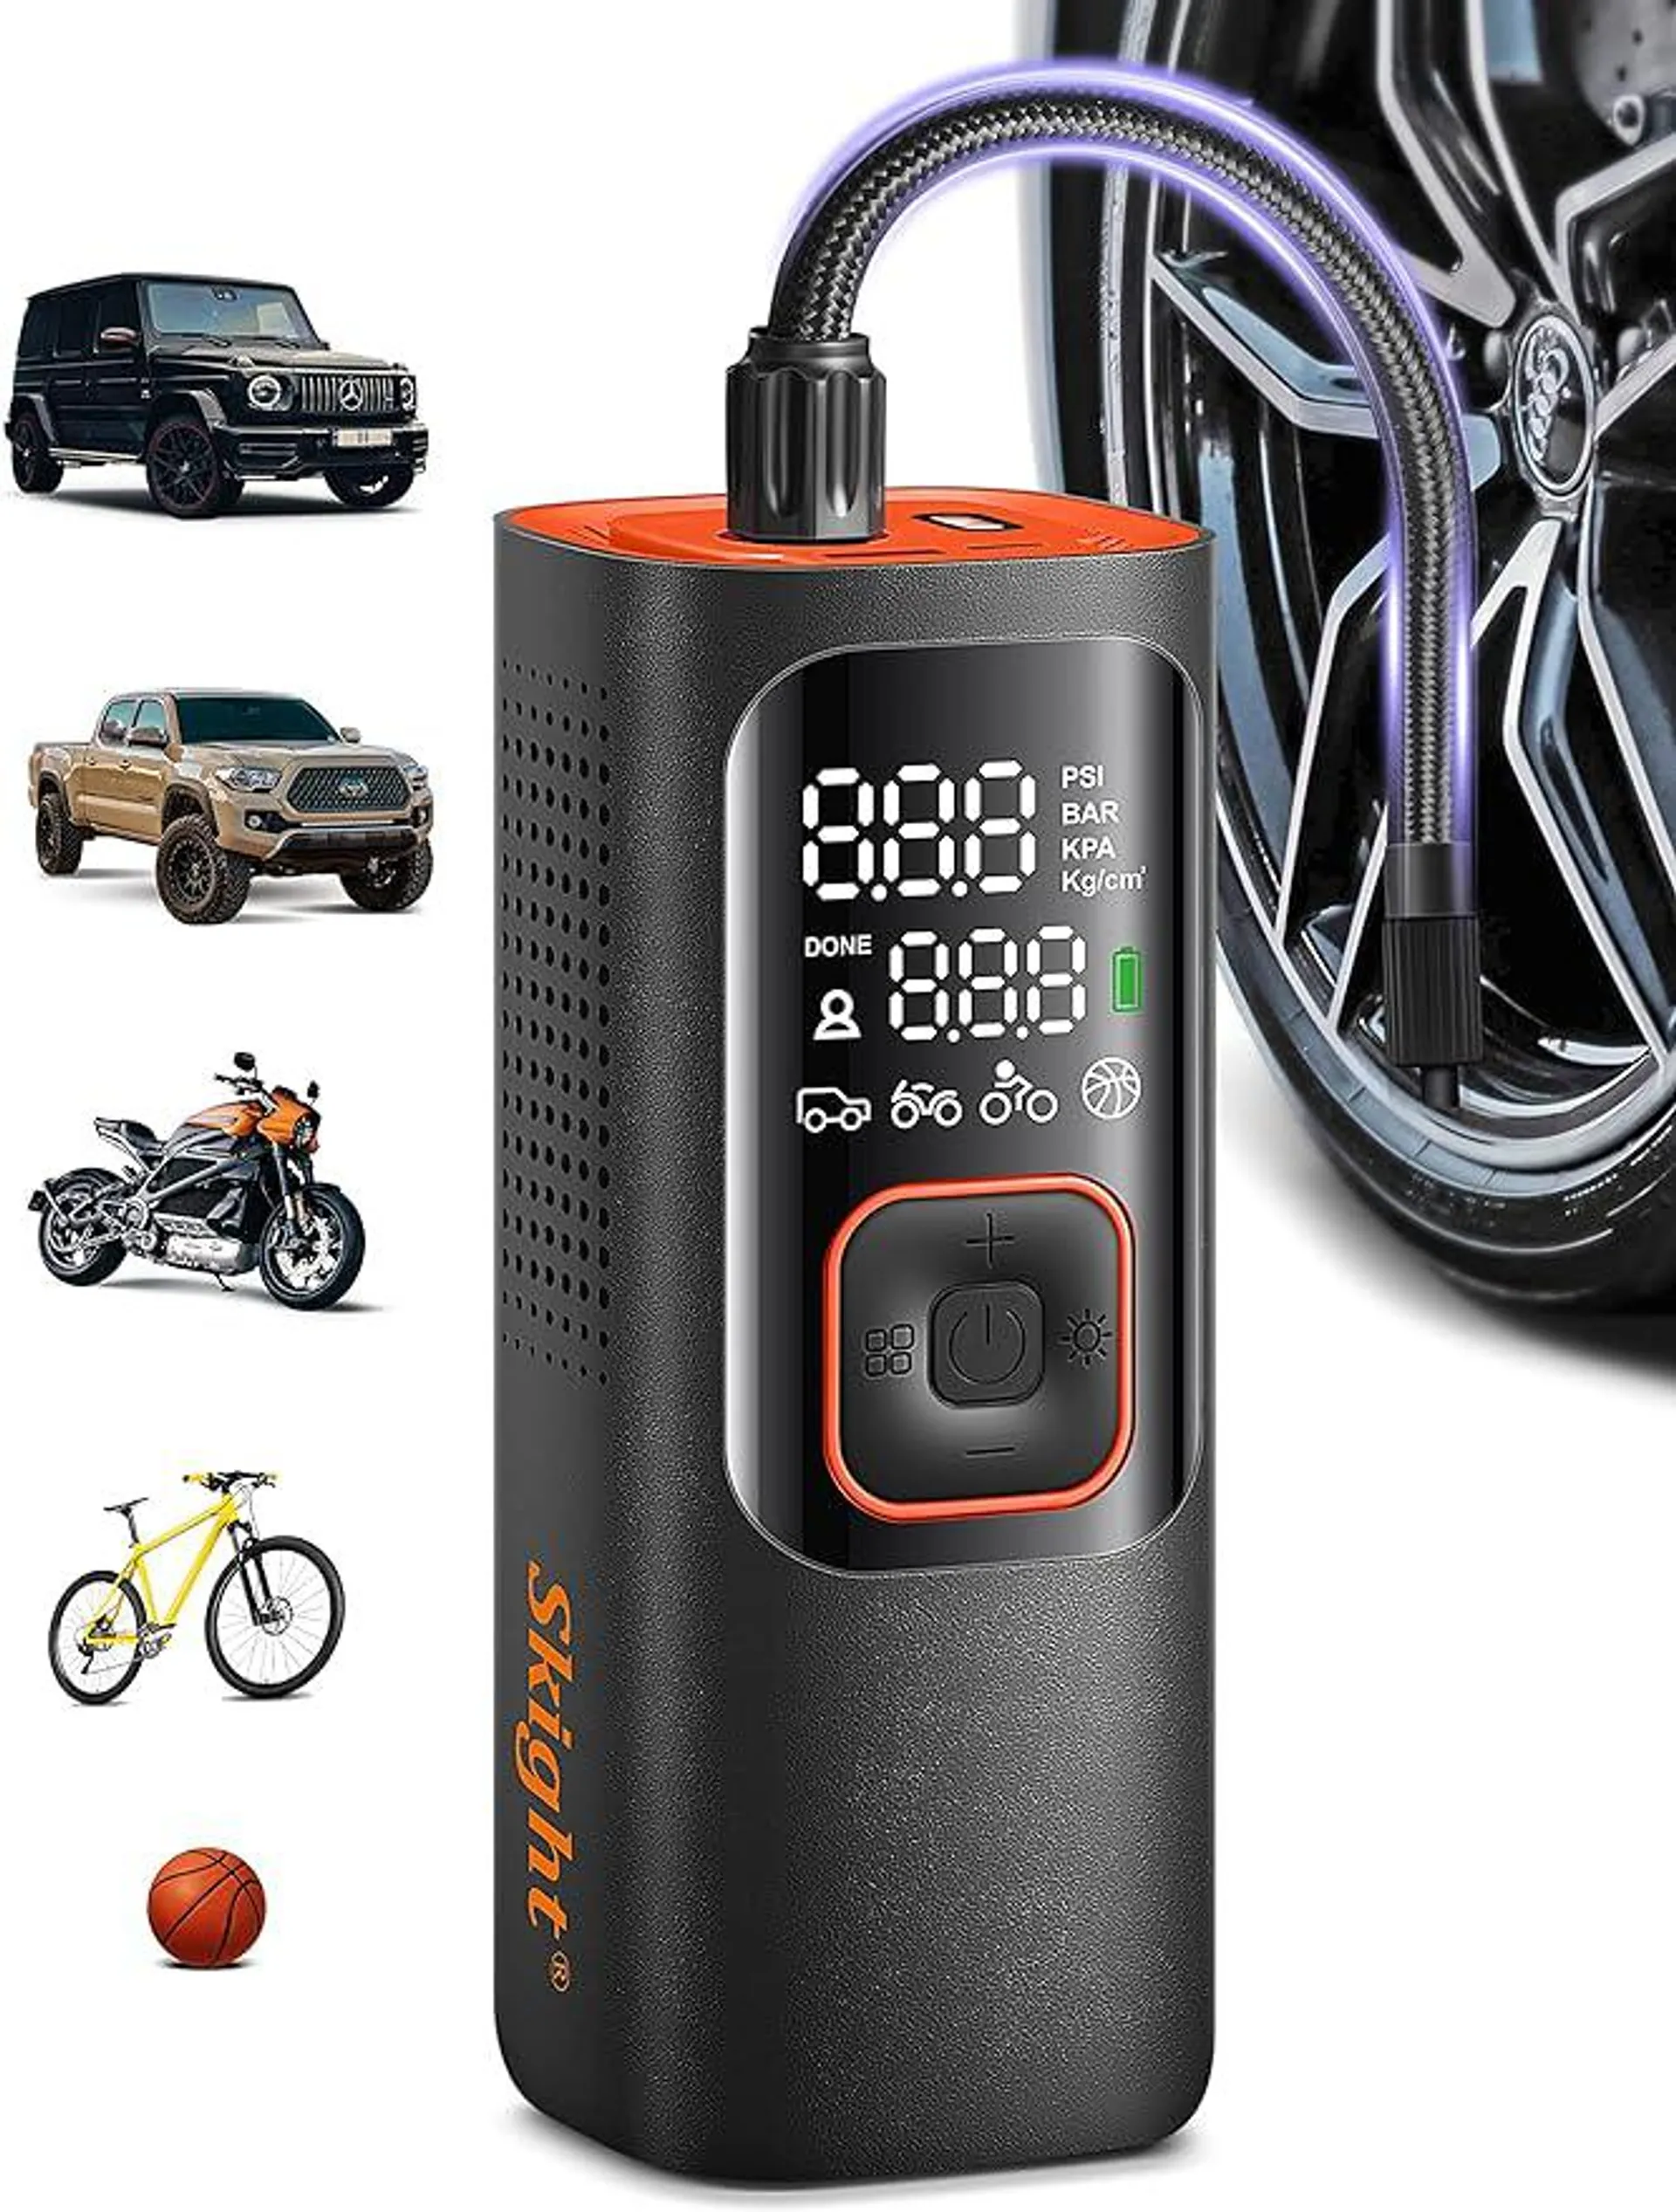 Skight Tire Inflator Portable Air Compressor - Powerful 150PSI & 2X Faster, Accurate Pressure LCD Display, Cordless Easy Operation - Portable Air Pump for Car, Motorcycle, E-Bike, Ball